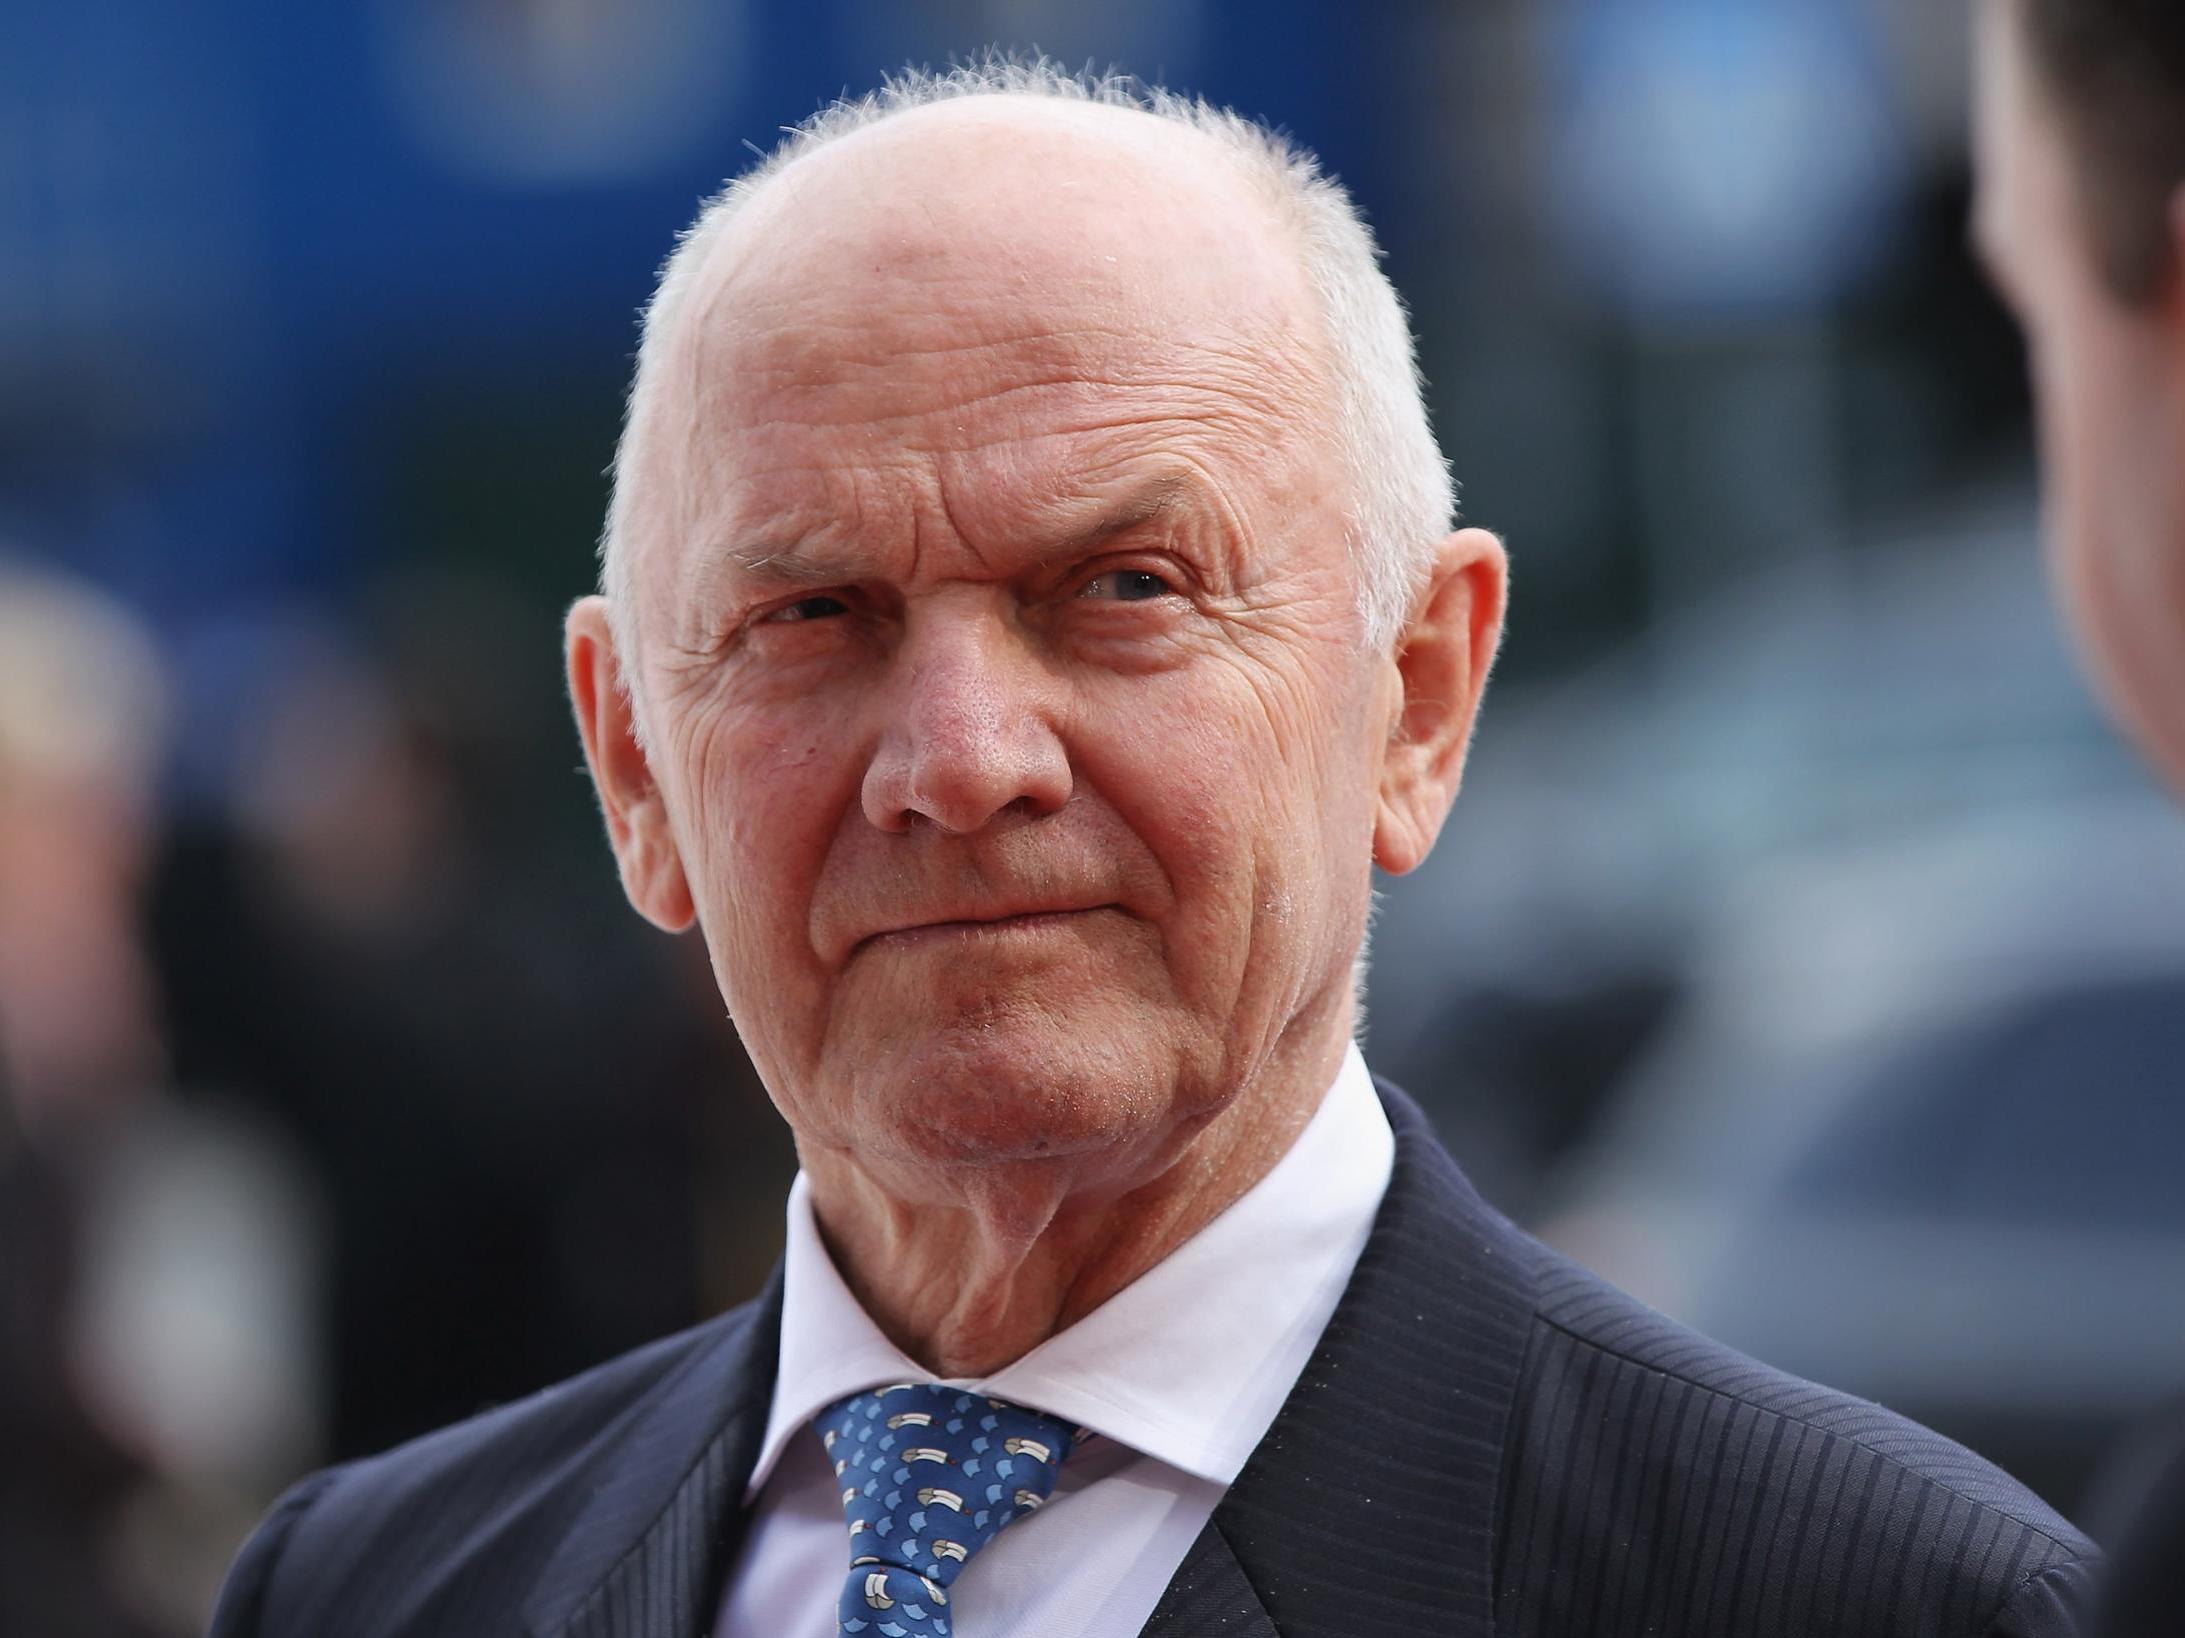 Ferdinand Piech: Executive who made VW Europe's biggest carmaker